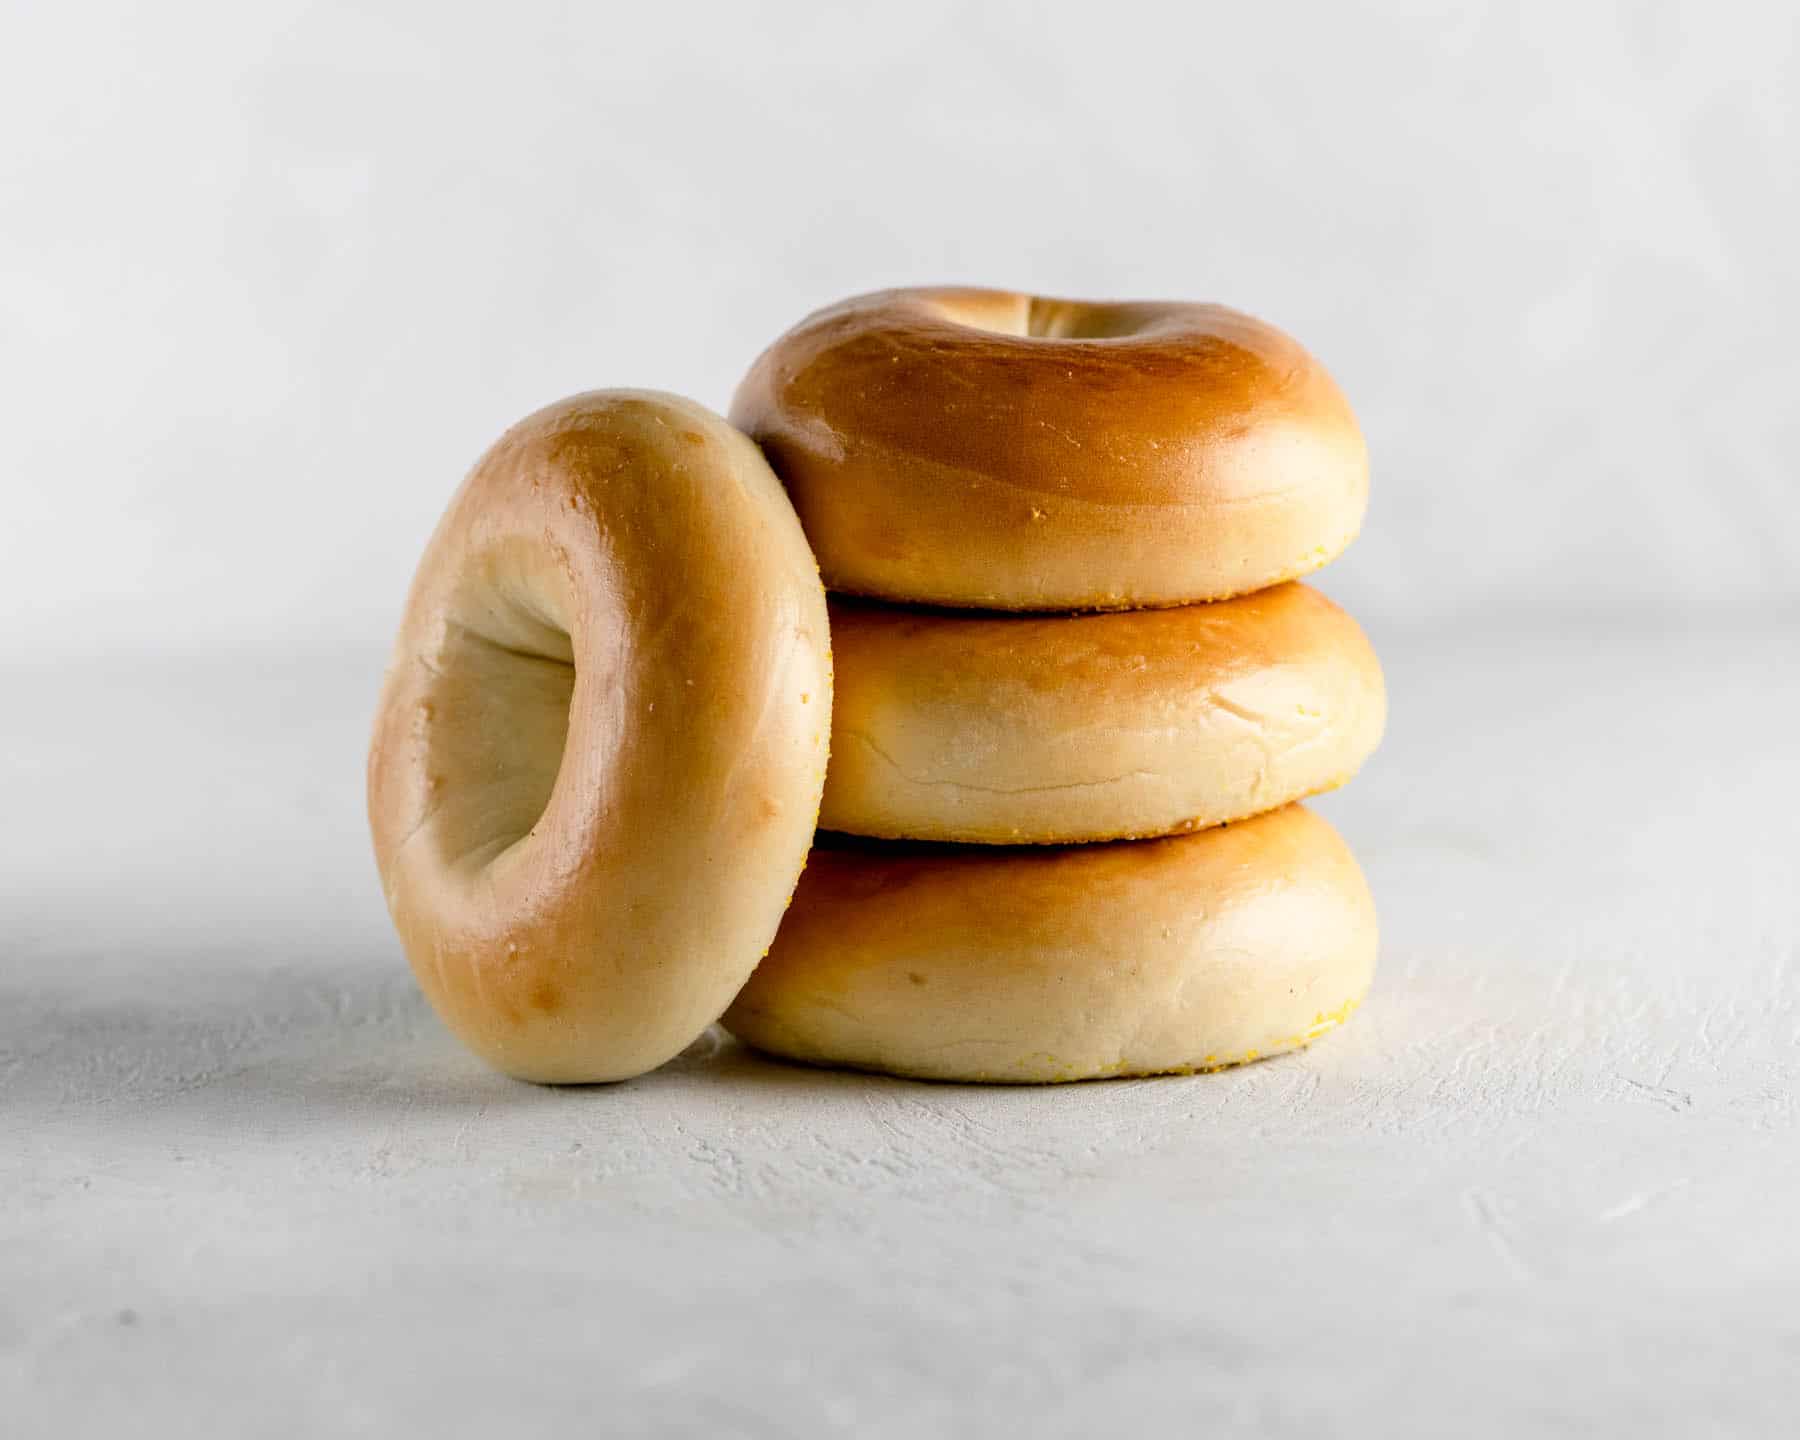 4 plain new york bagels stacked on a gray table